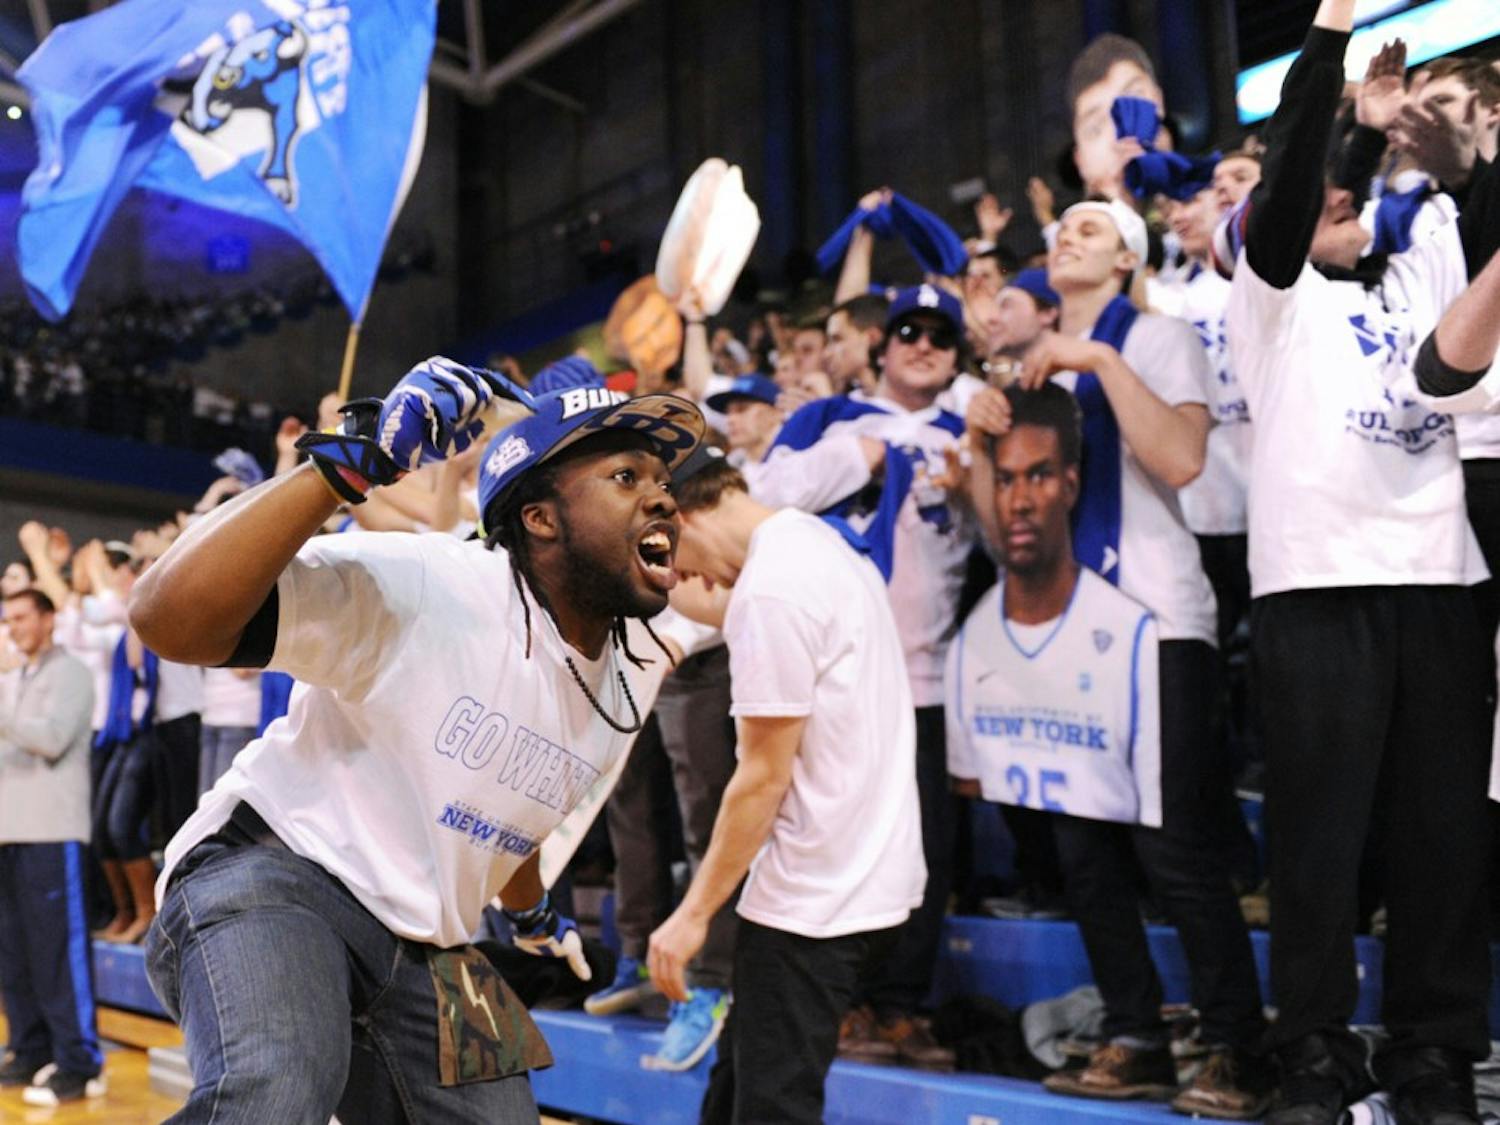 Shane Patterson looks to get the crowd excited during a UB basketball home game. The junior communication major is in the process of trying to walk on to the football team as a wide receiver while spreading his positive energy around campus.